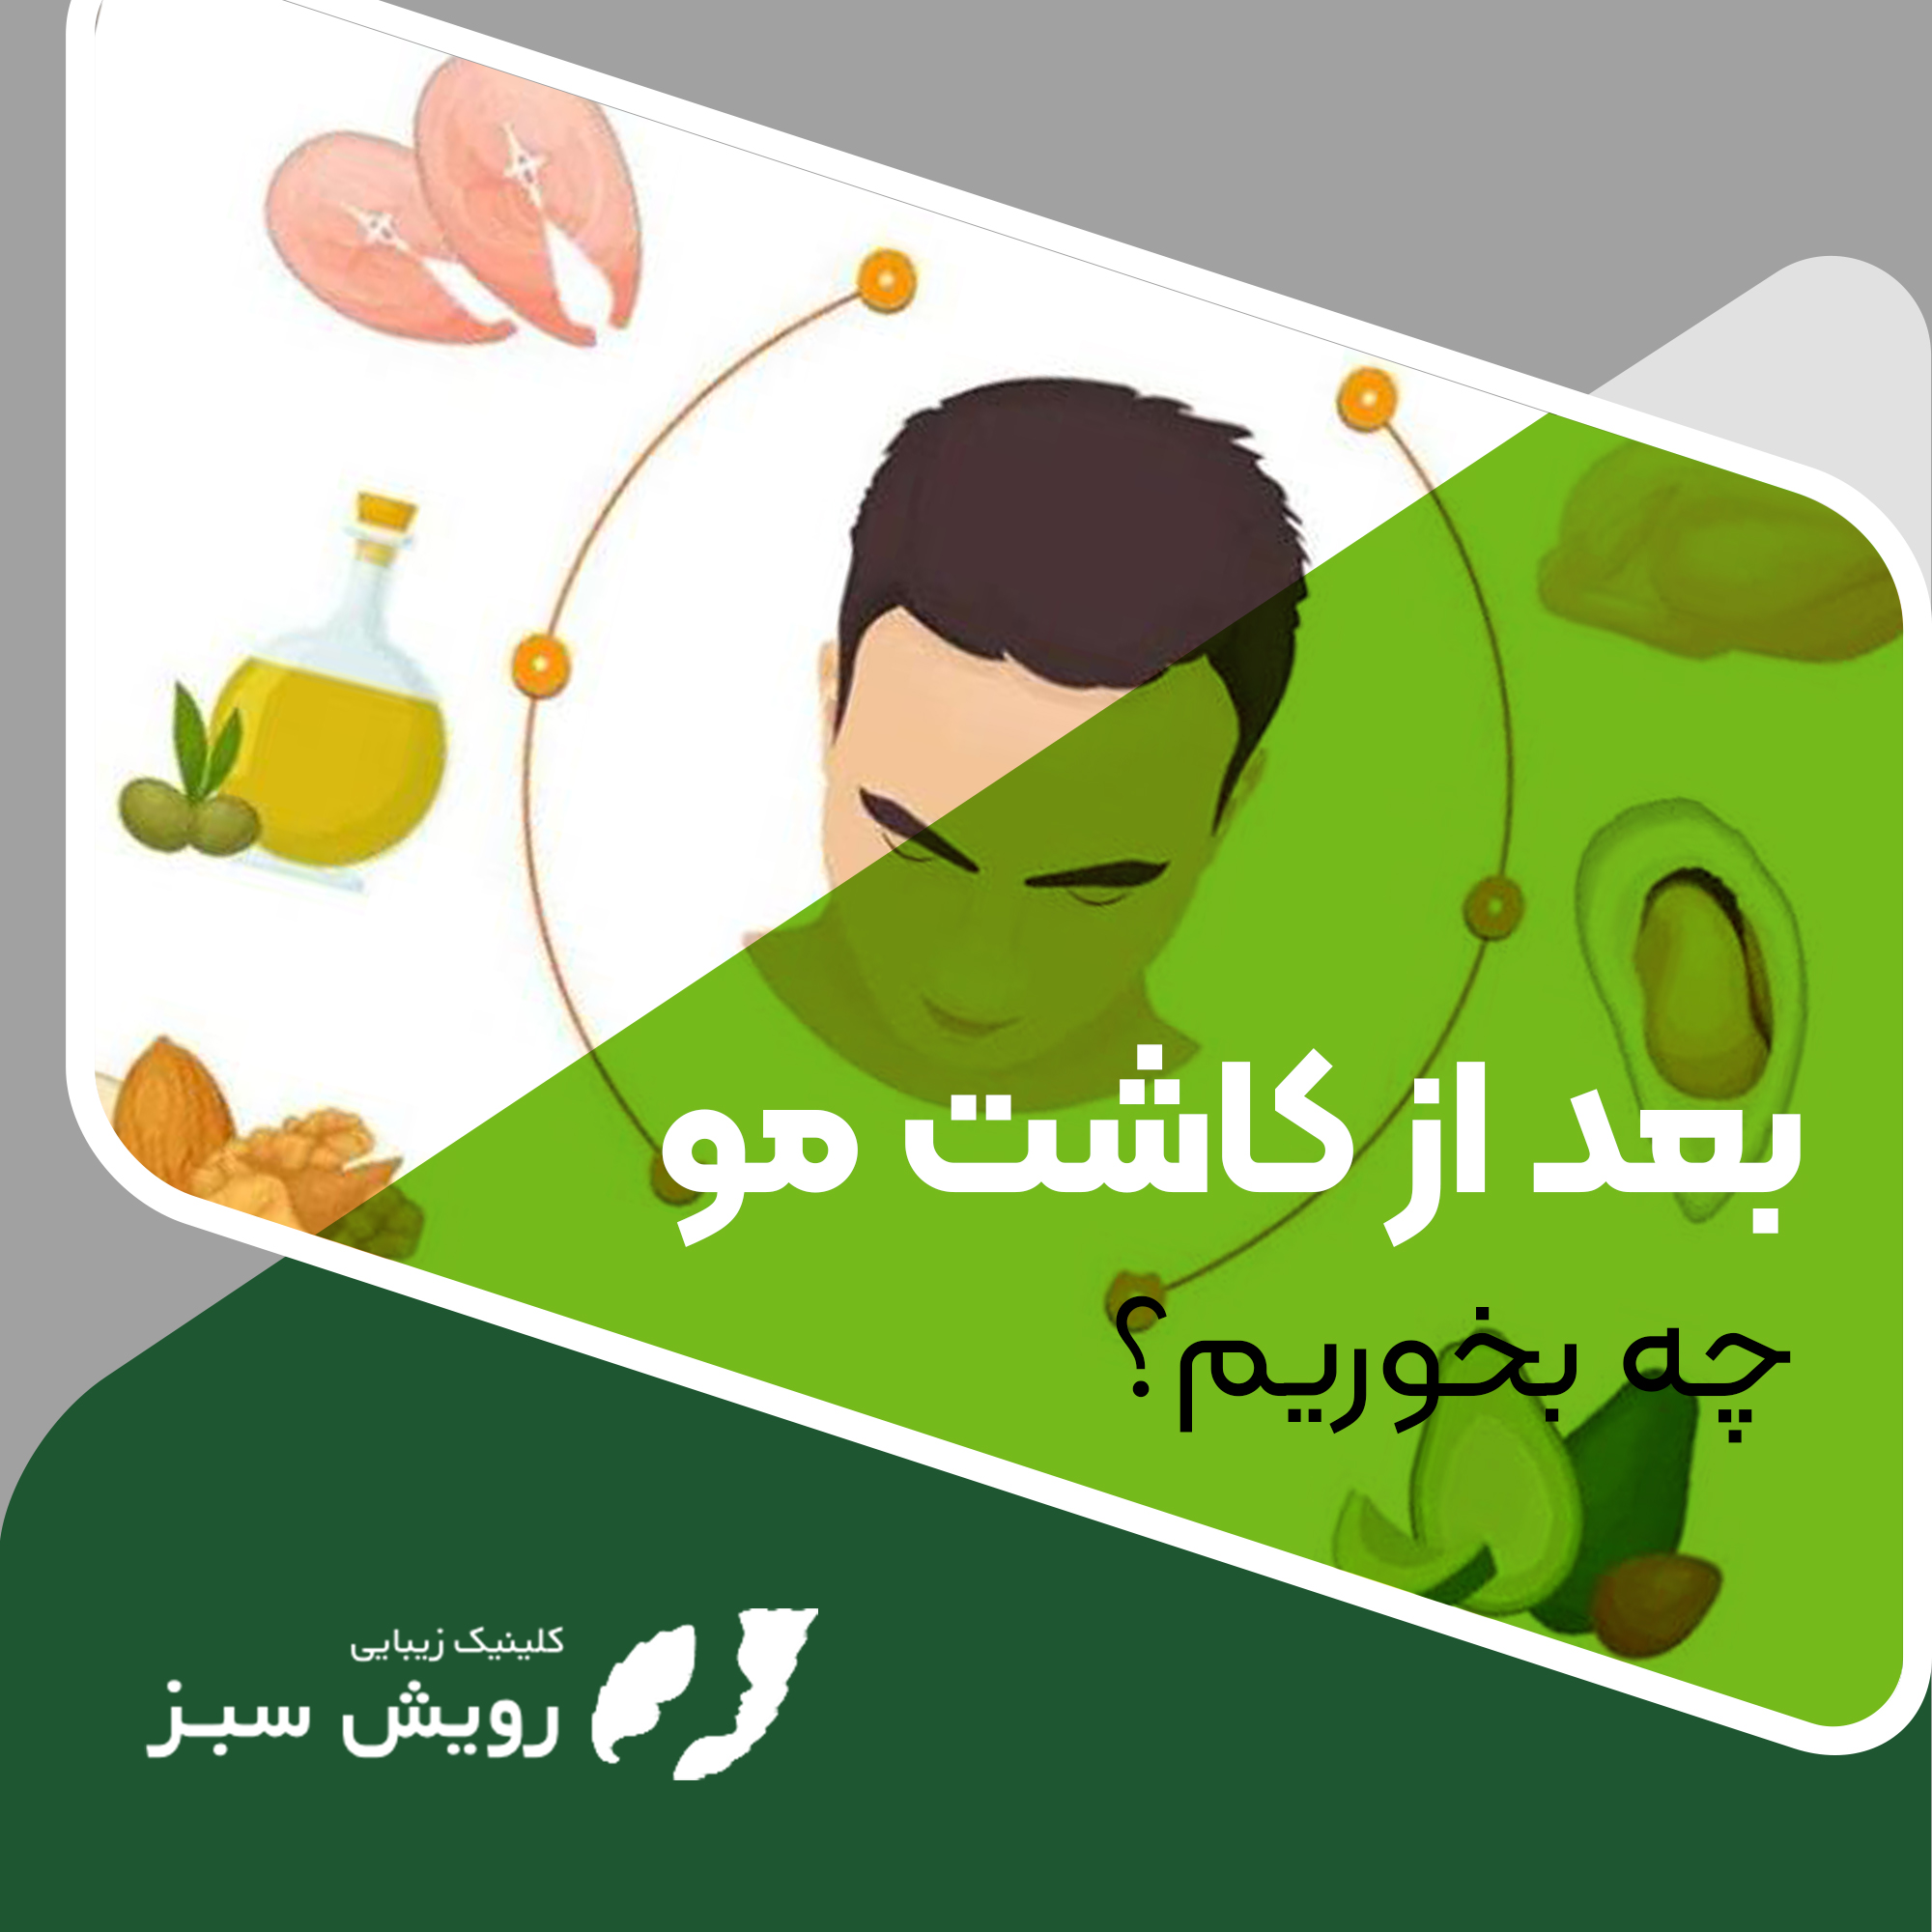 You are currently viewing بعد از کاشت مو چه بخوریم؟